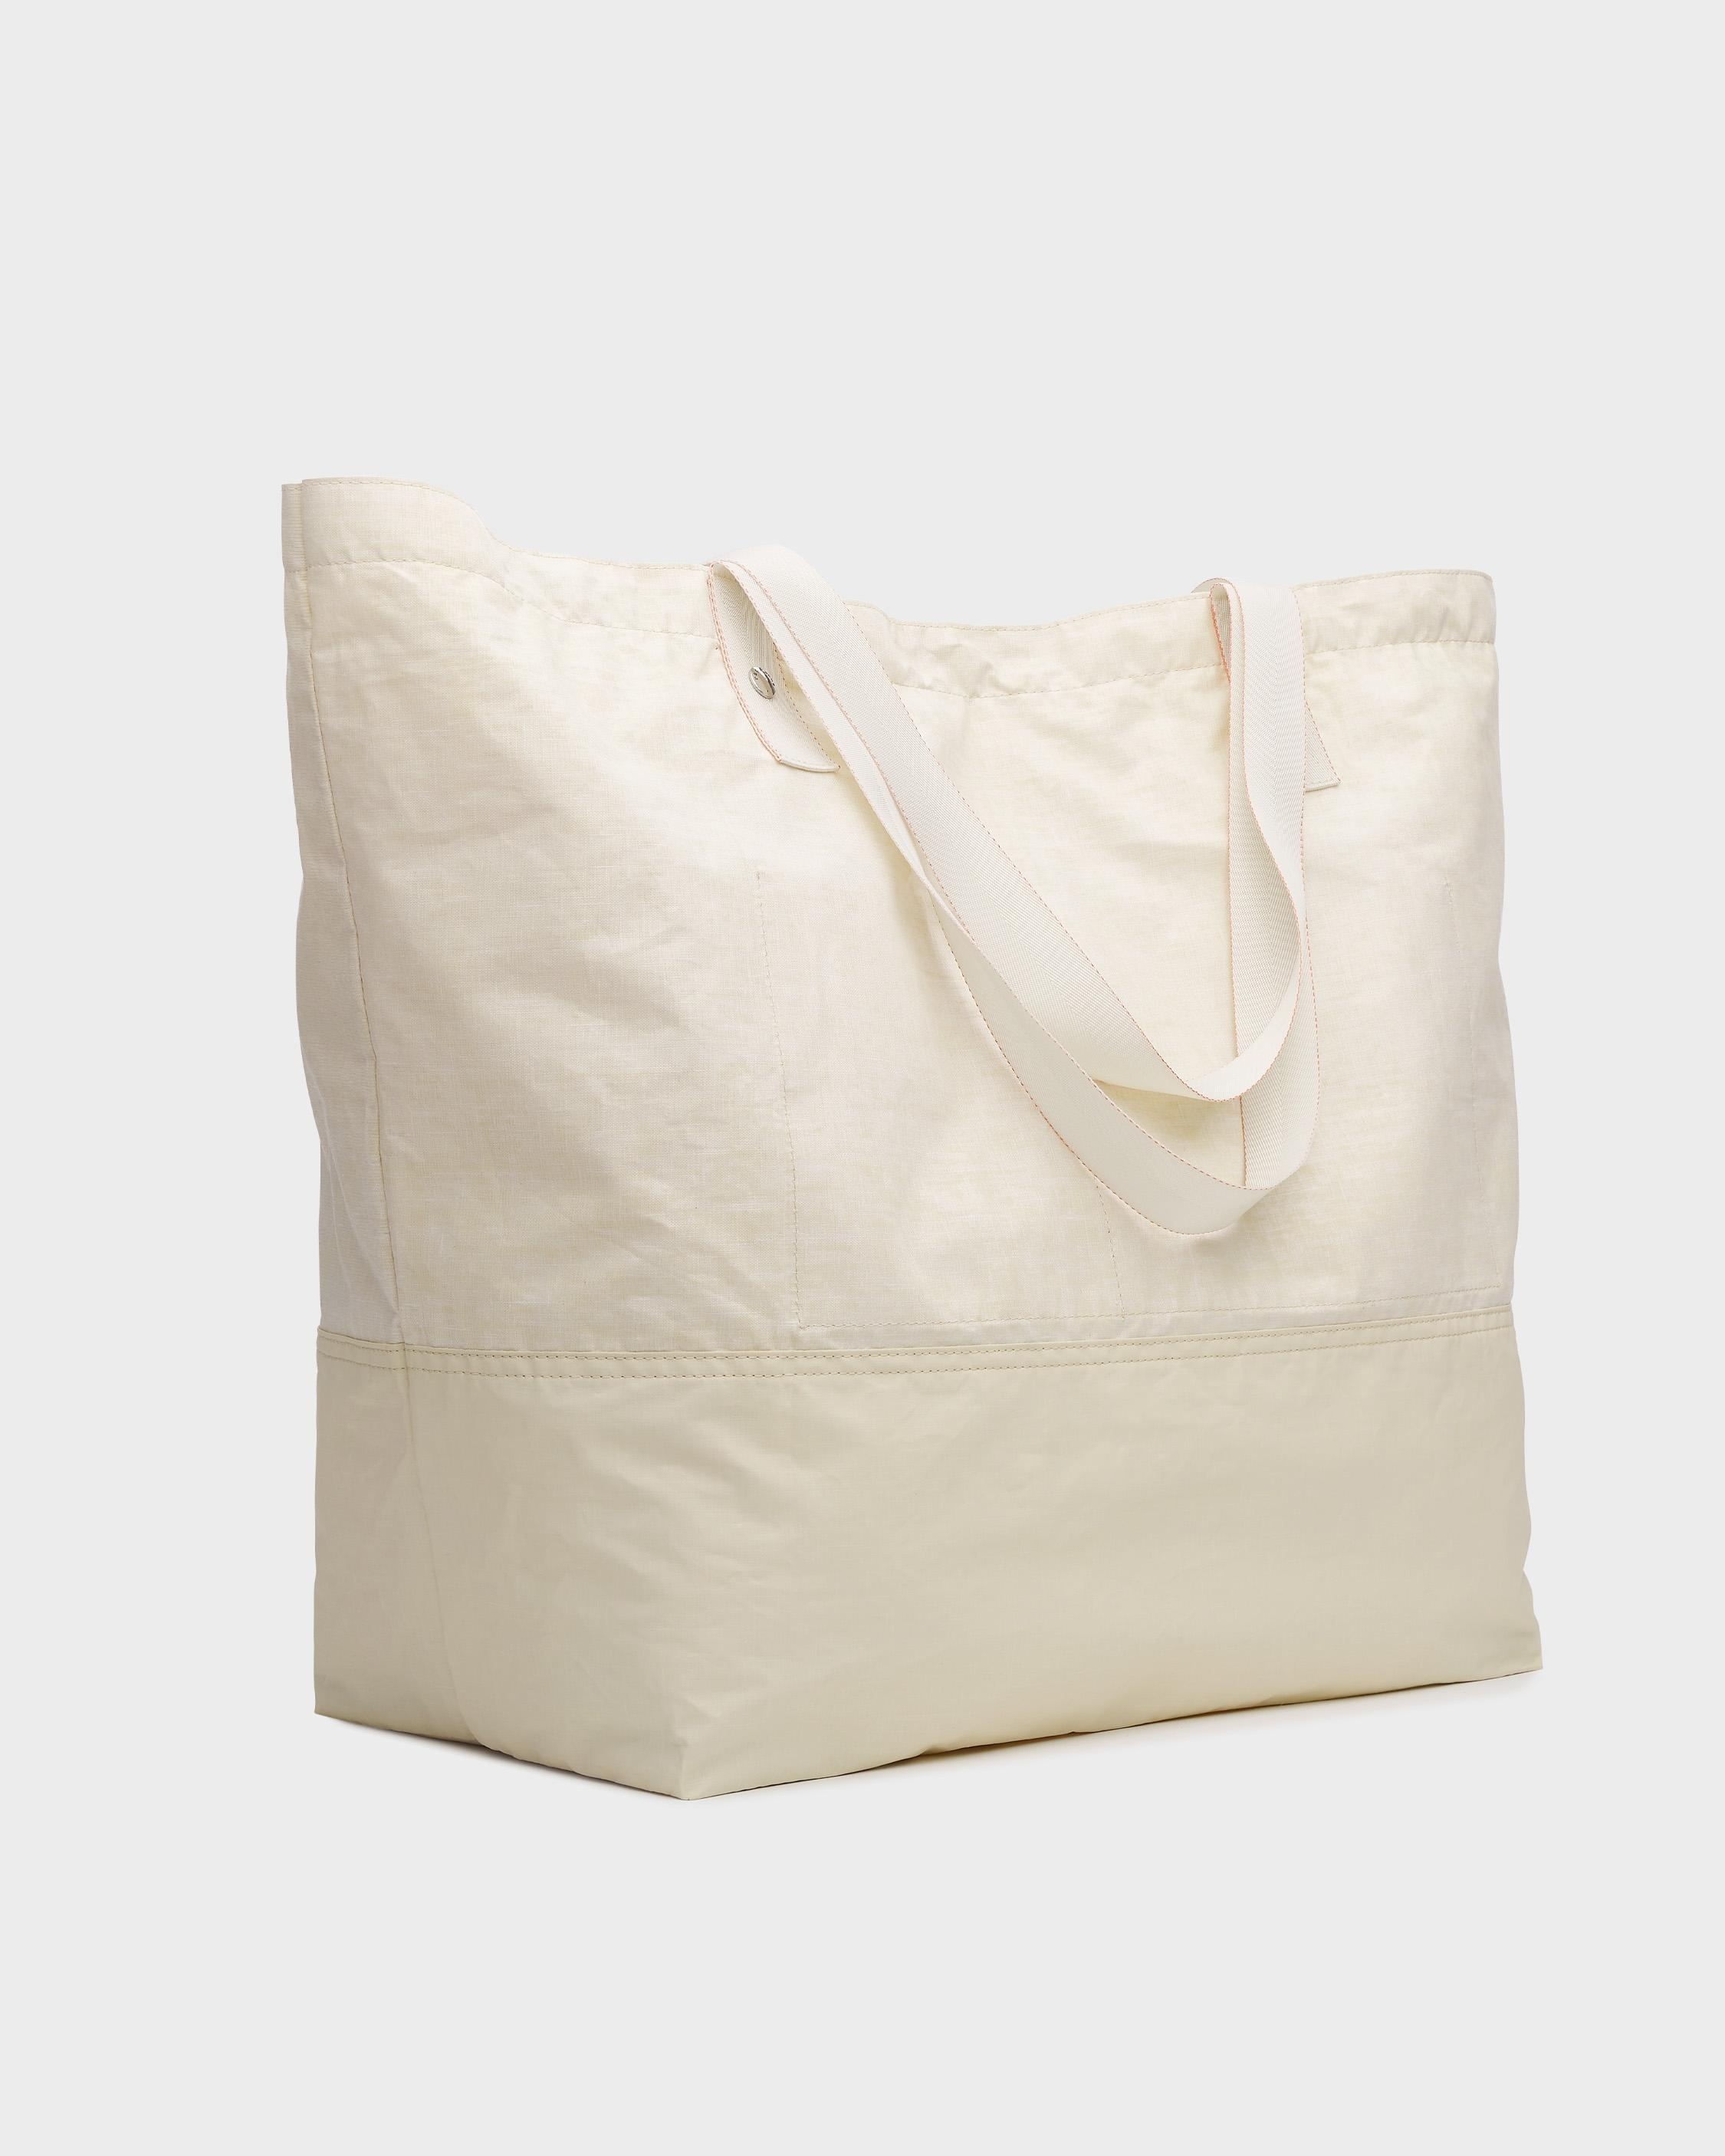 Addison Oversized Tote - Linen
Extra Large Tote - 3